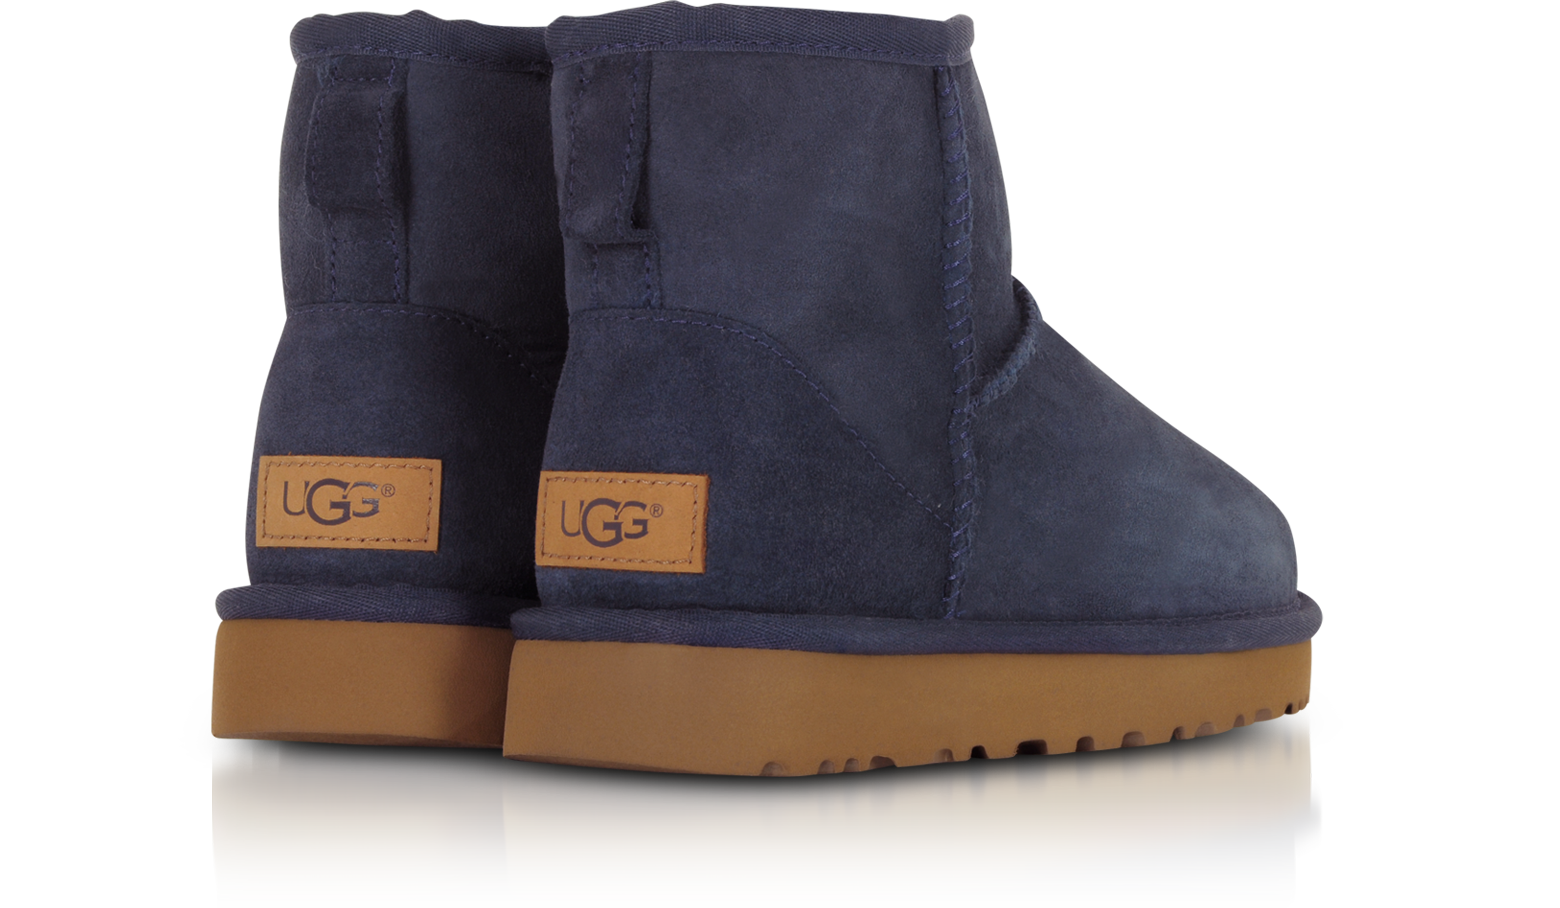 ugg navy boots